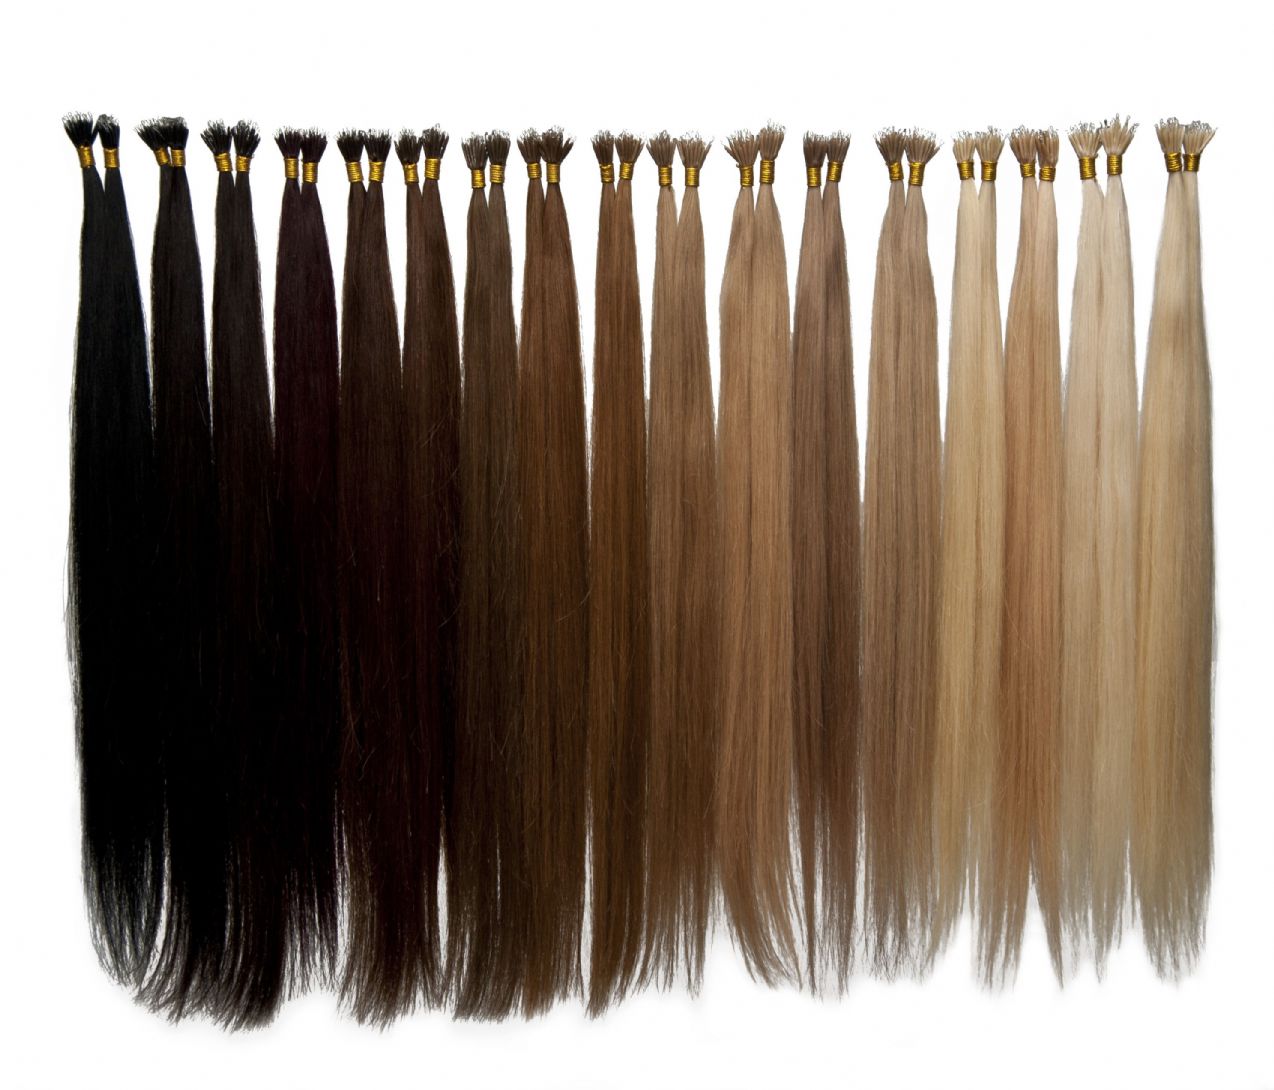 When people want hair extensions, can’t they just visit a salon and, well – buy them? Not always: You may be able to find a variety of extensions in certain U.S. locations, but this is far from the case in other parts of the world, or even out on the streets, where people may be looking to buy cheap hair extensions out of a trunk with no questions asked. You see, extensions made from real hair are a very limited product usually controlled by only a few vendors and with no easy way to create product identification. It’s the perfect set-up for a thriving black market.